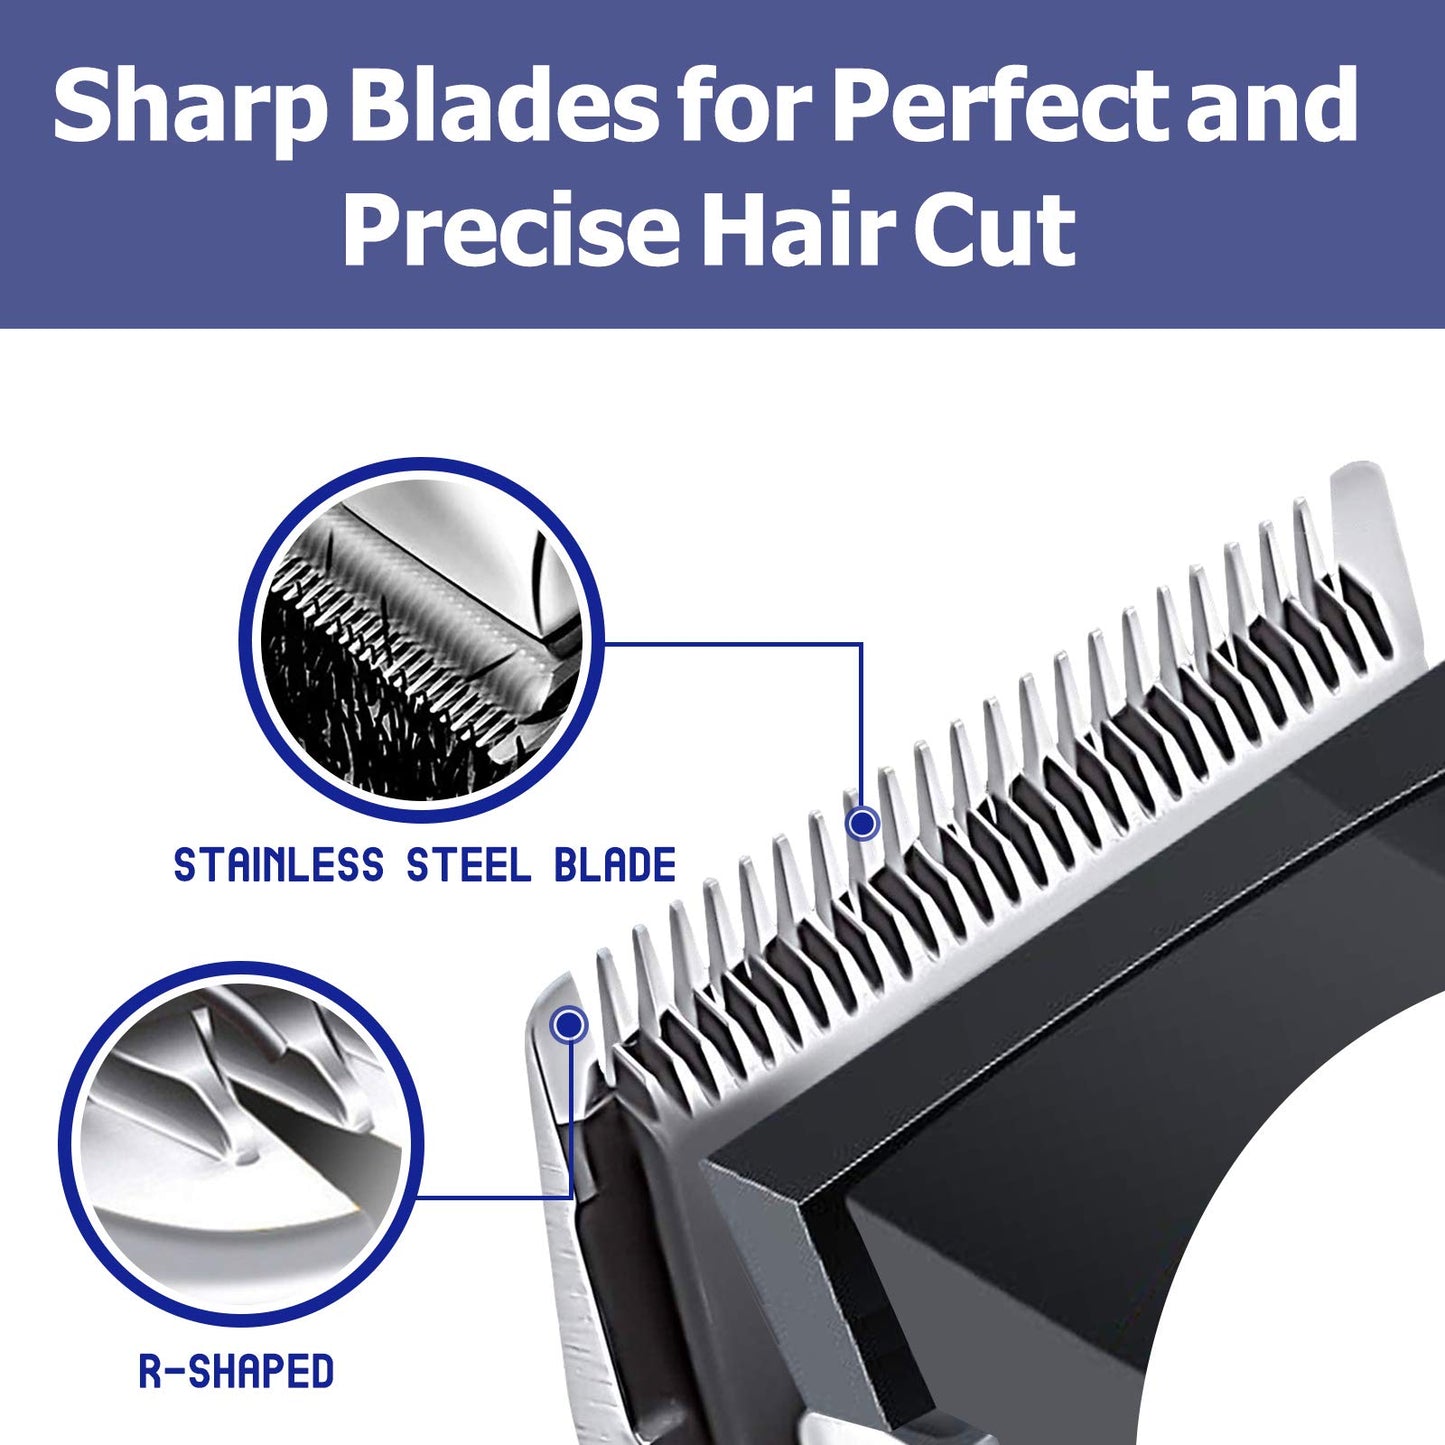 Professional Corded Hair Clippers for Men Kids, Strong Motor - default